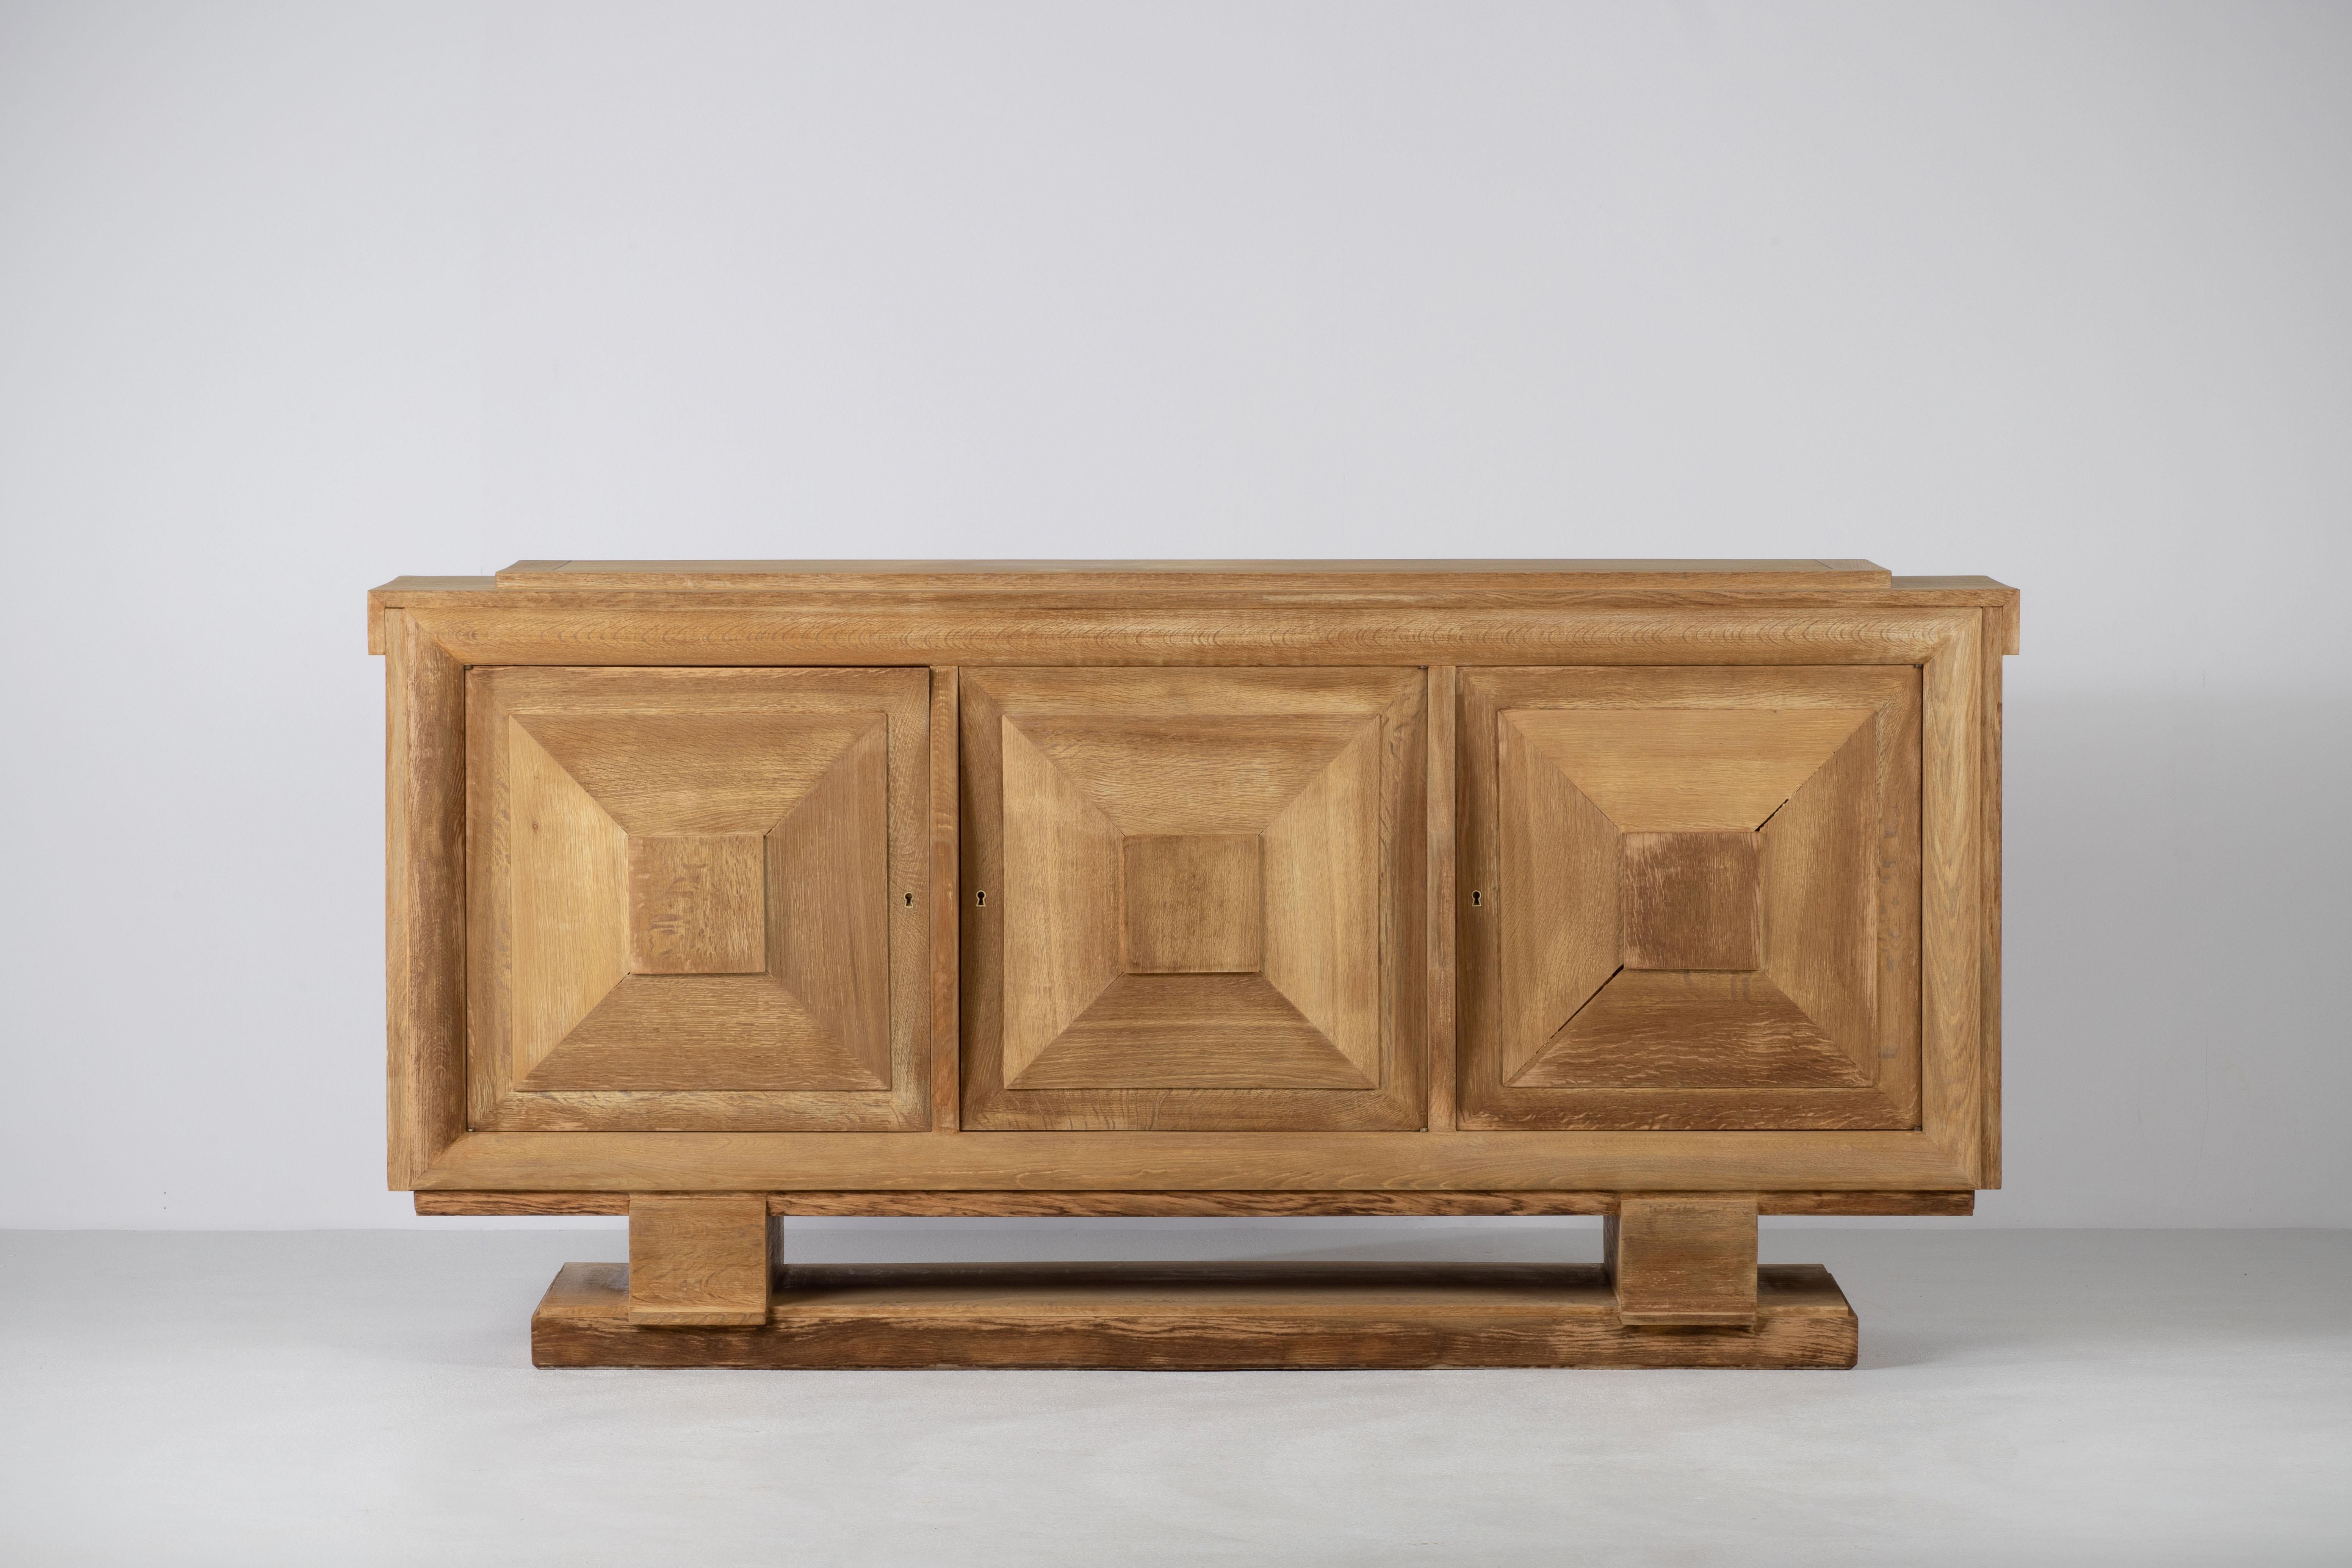 A large sideboard/credenza presumably by Charles Dudouyt. 
France, c1930s.
Consists of three doors providing shelves storage compartments and two central drawers. 
Graphic design doors make this piece really stand out.
The sideboard is in